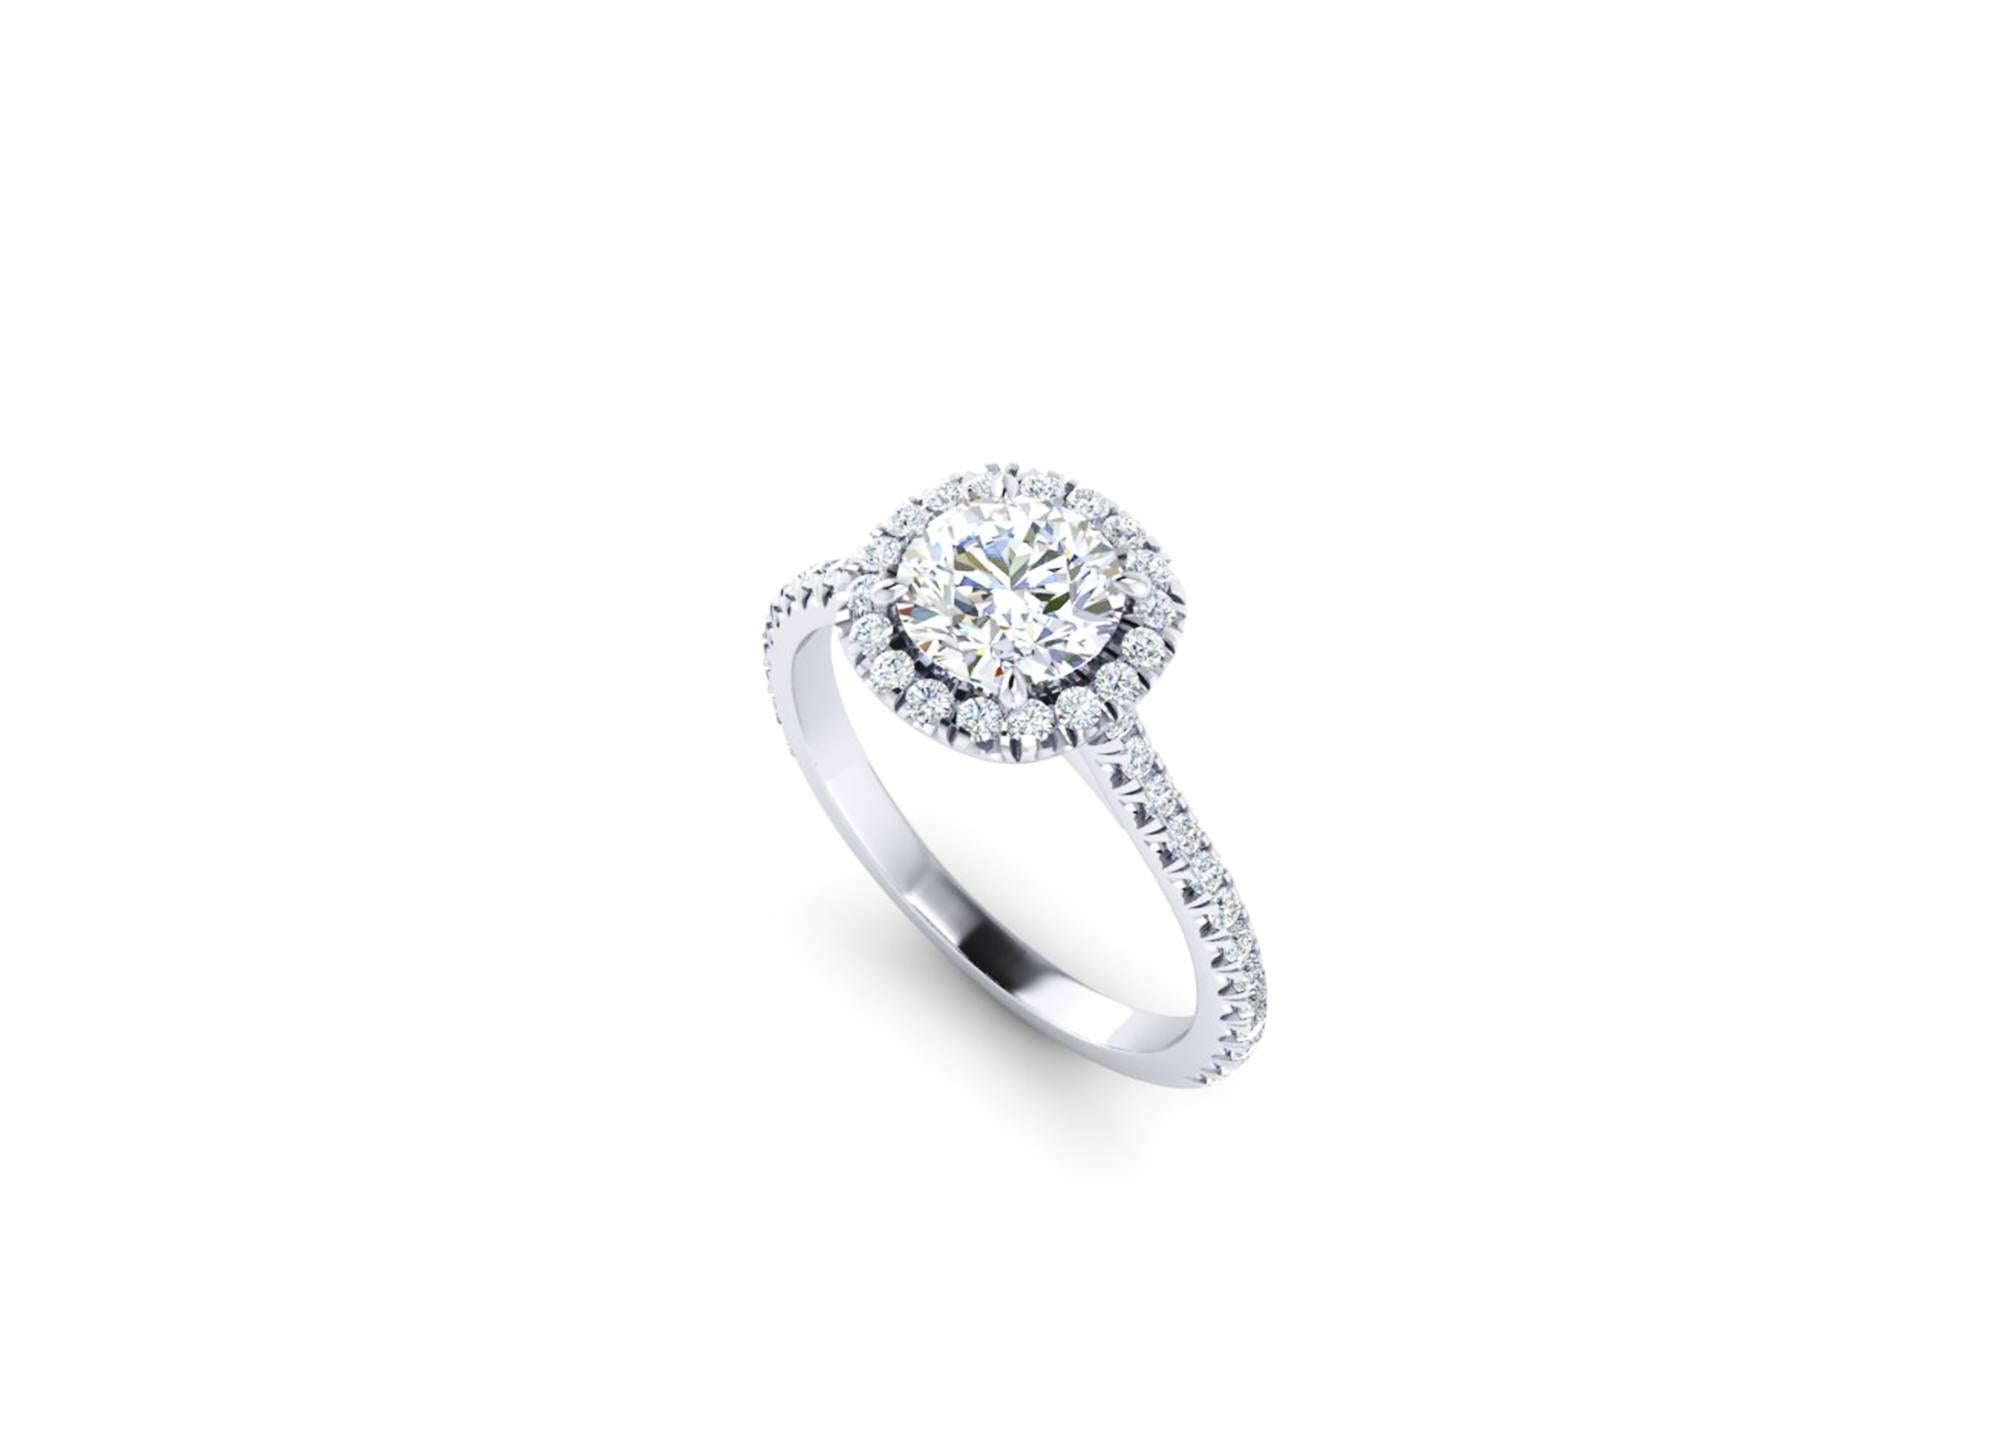 GIA Certified 1.06 Round diamond, G color, IF clarity, Internally Flawless with Triple Excellent Specs. a stunning classic, incredibly beautiful diamond set in a hand made halo diamond ring with a total of 44 diamonds and a total carat weight of